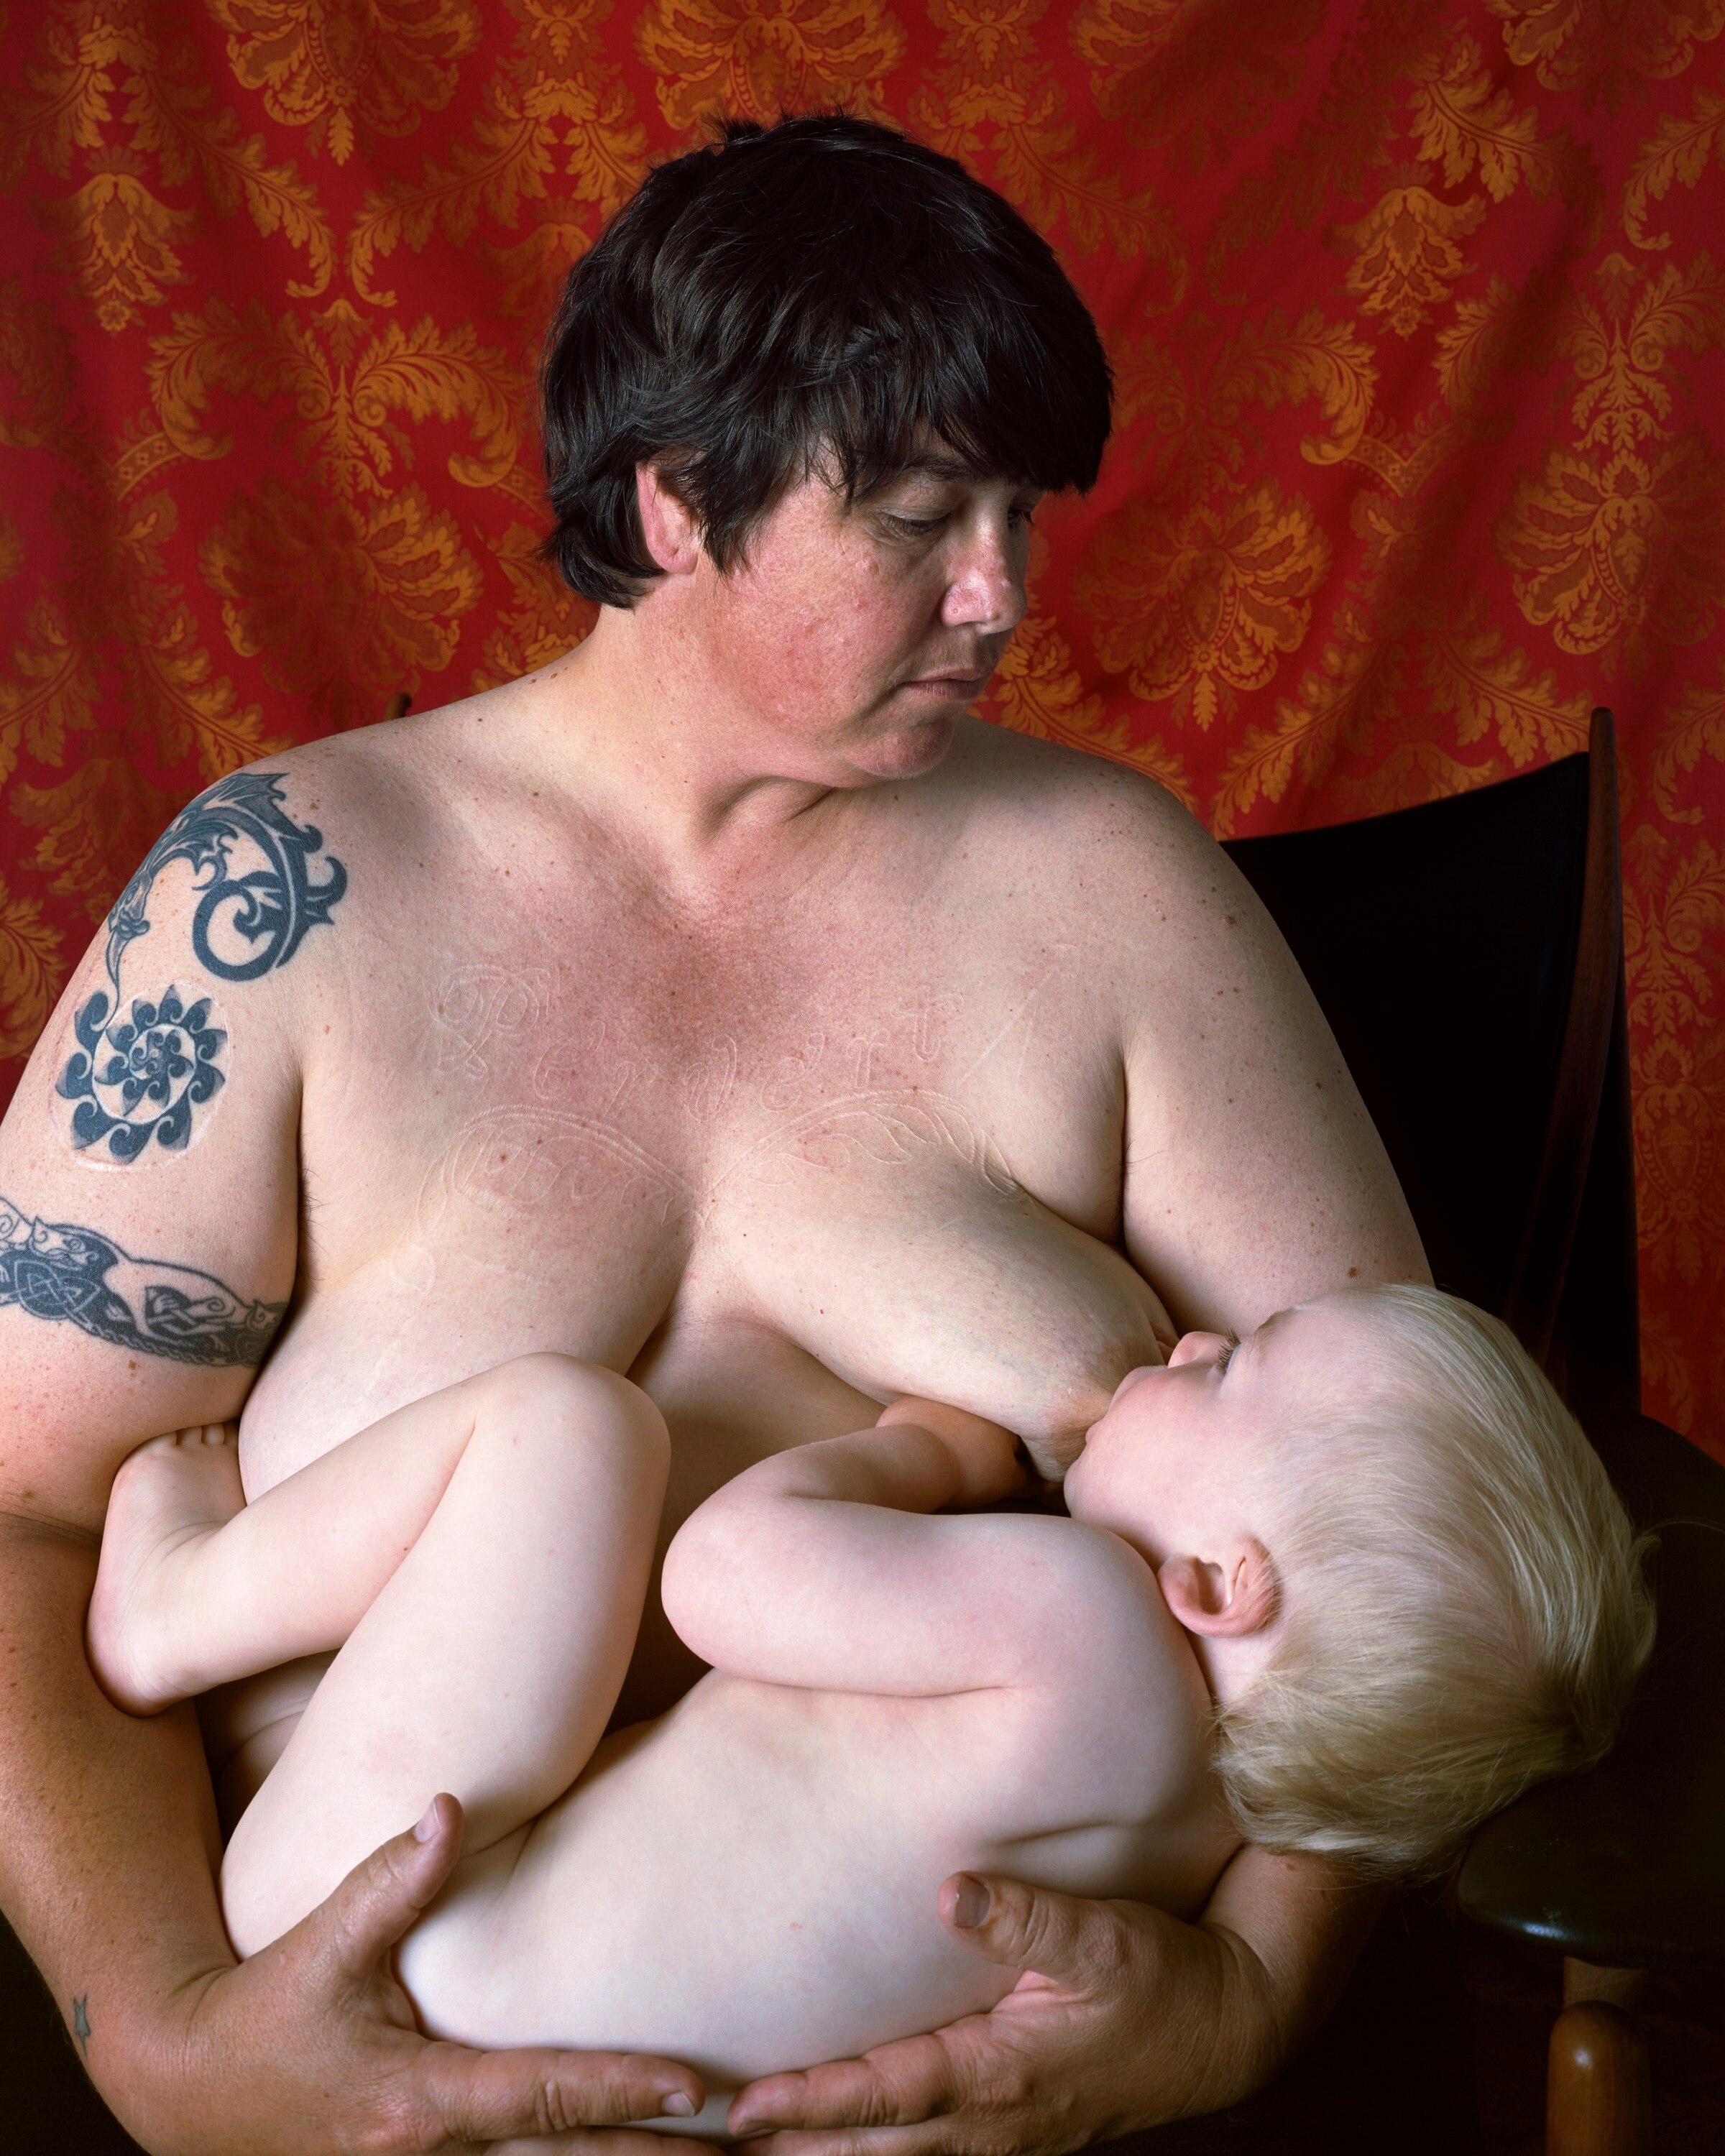 A bare-chested woman, with short brown hair and tattoos on her right shoulder, gazes at her baby as she nurses him